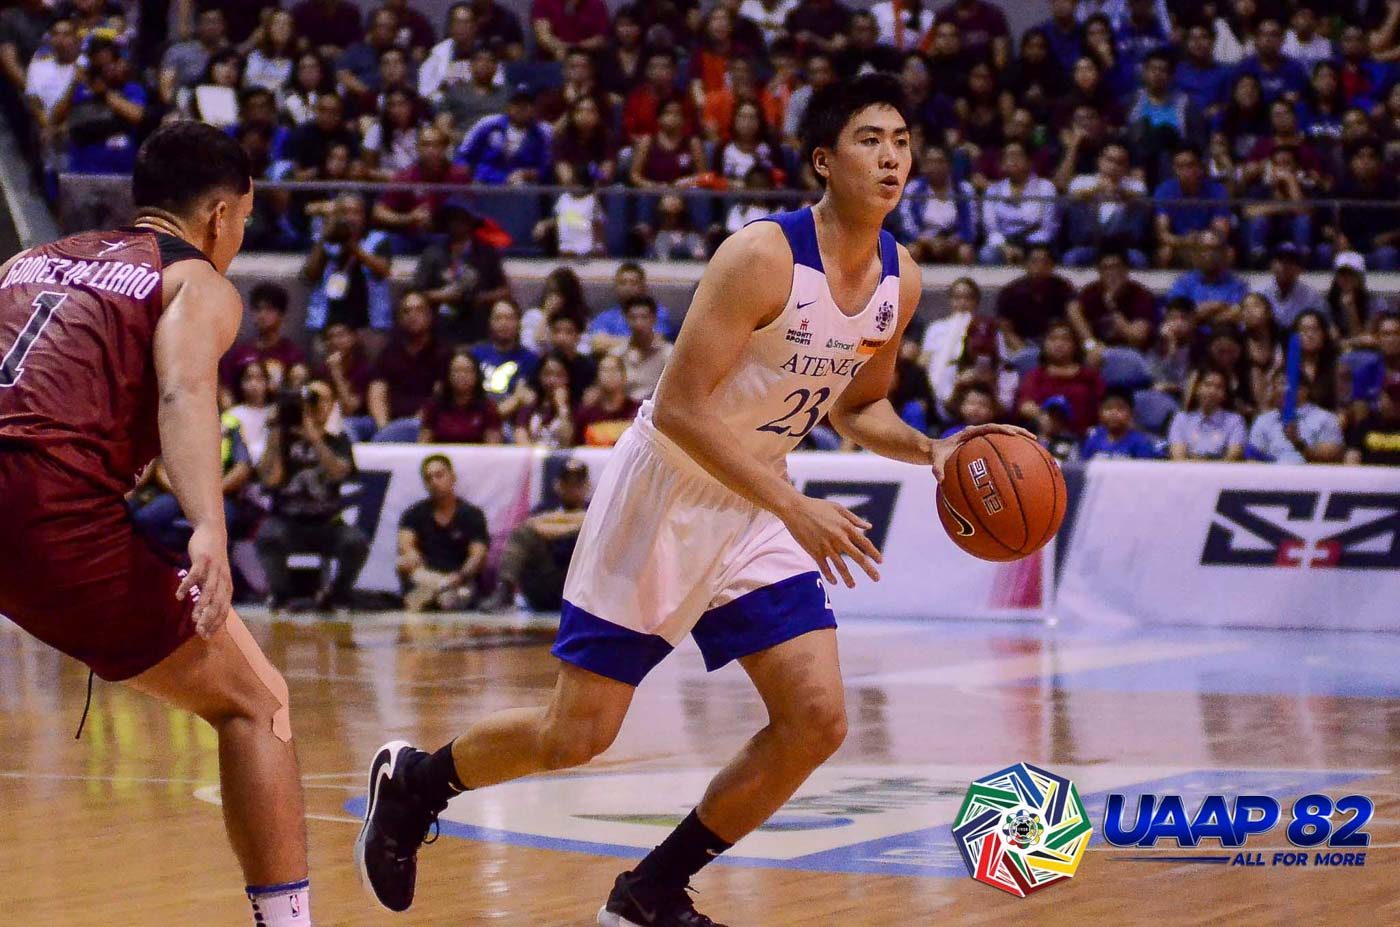 After concussion scare, Ateneo's Navarro likely back vs UP